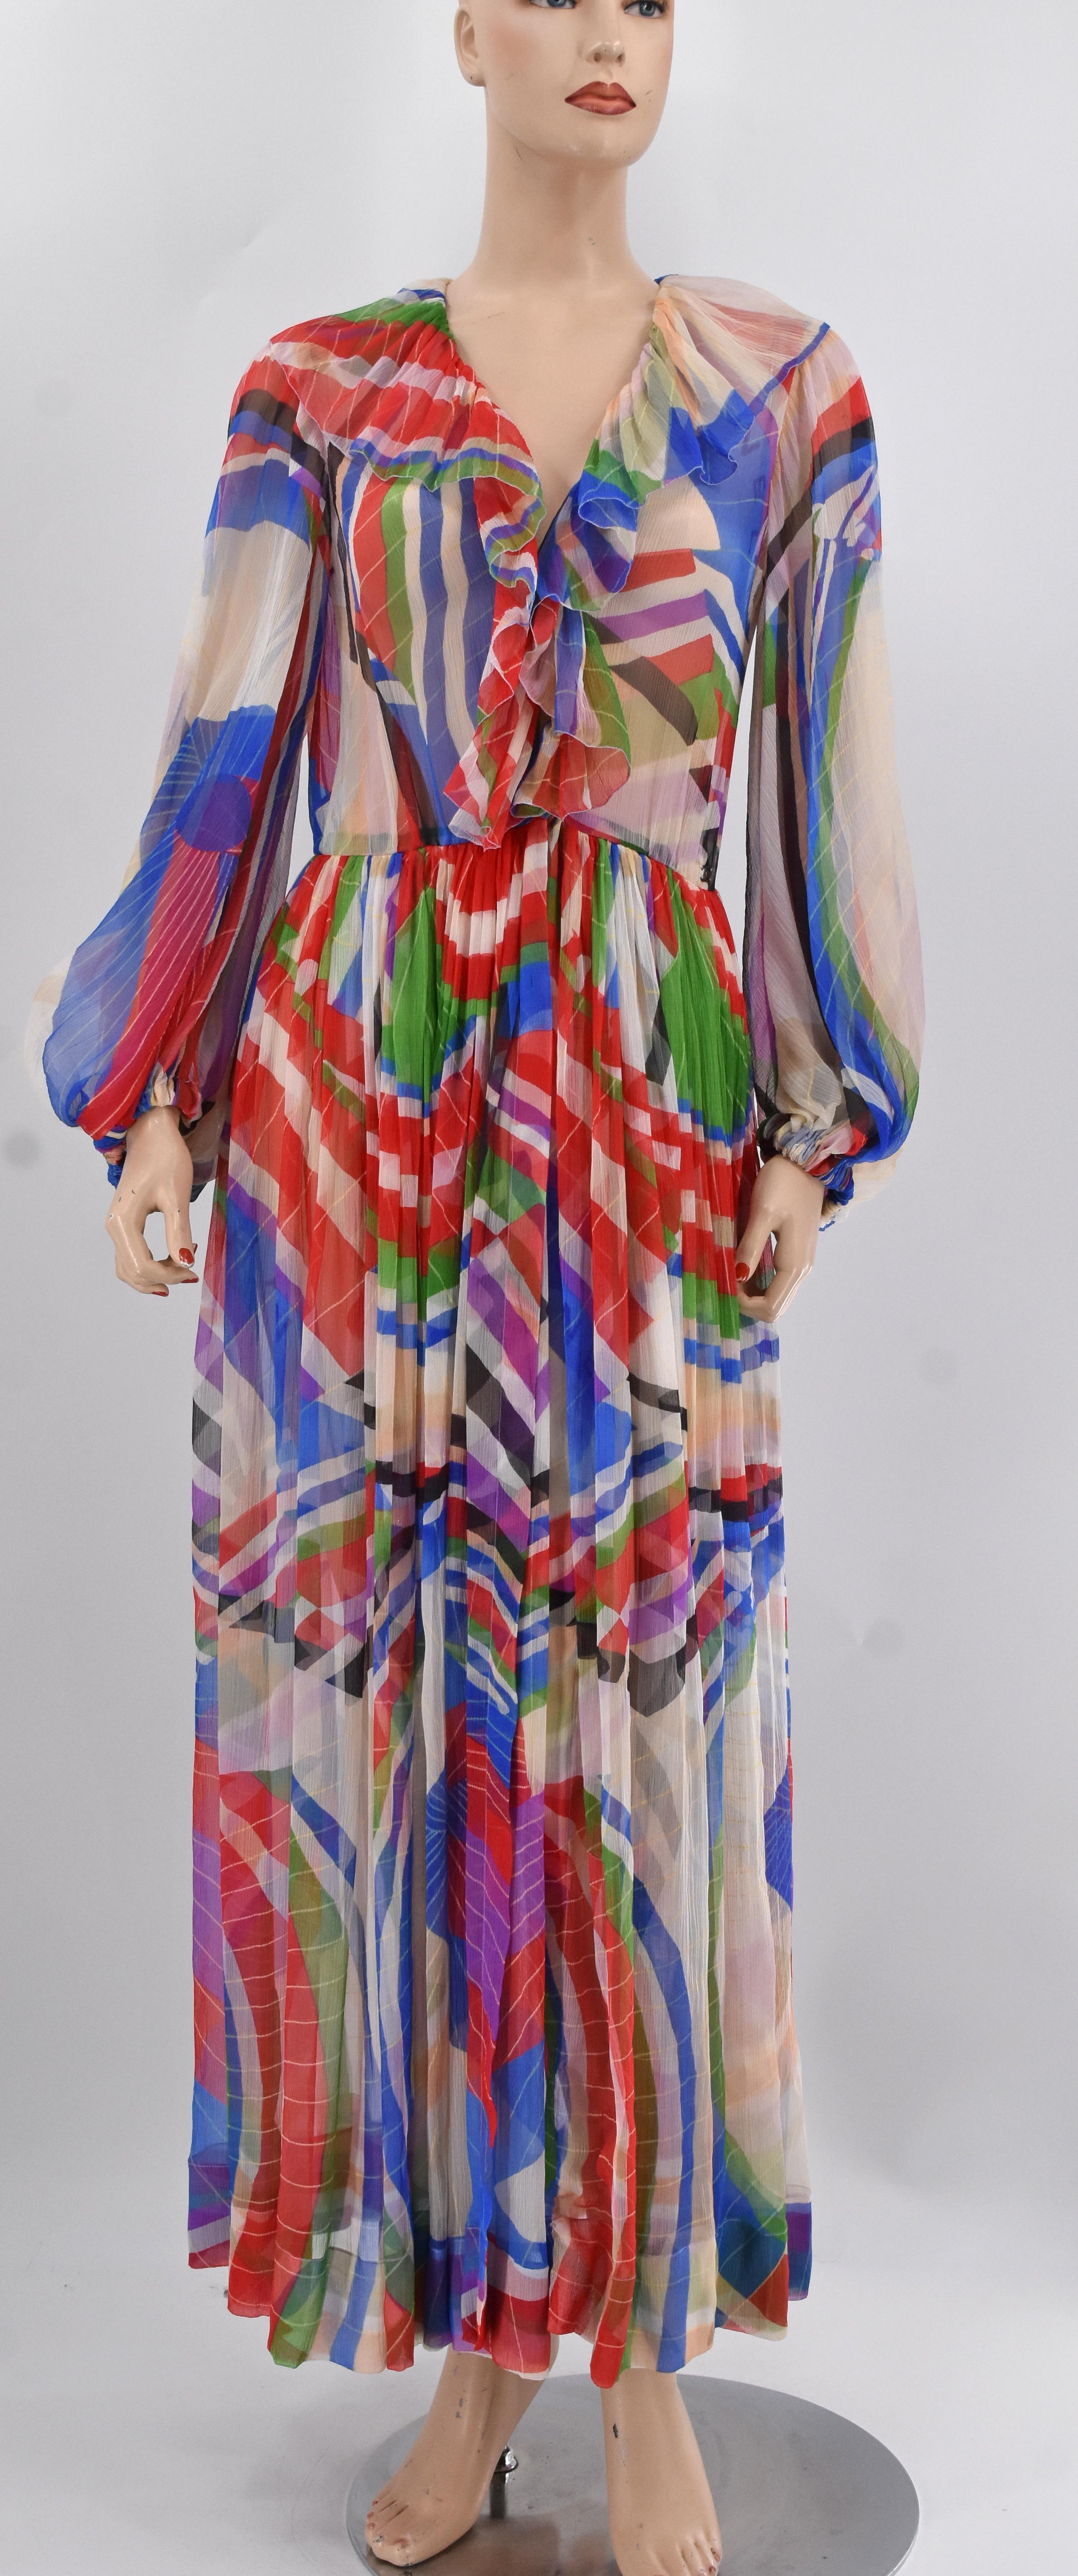 Chanel Chiffon Full Length Abstract Print Runway Dress 06P 2006 In New Condition For Sale In Merced, CA